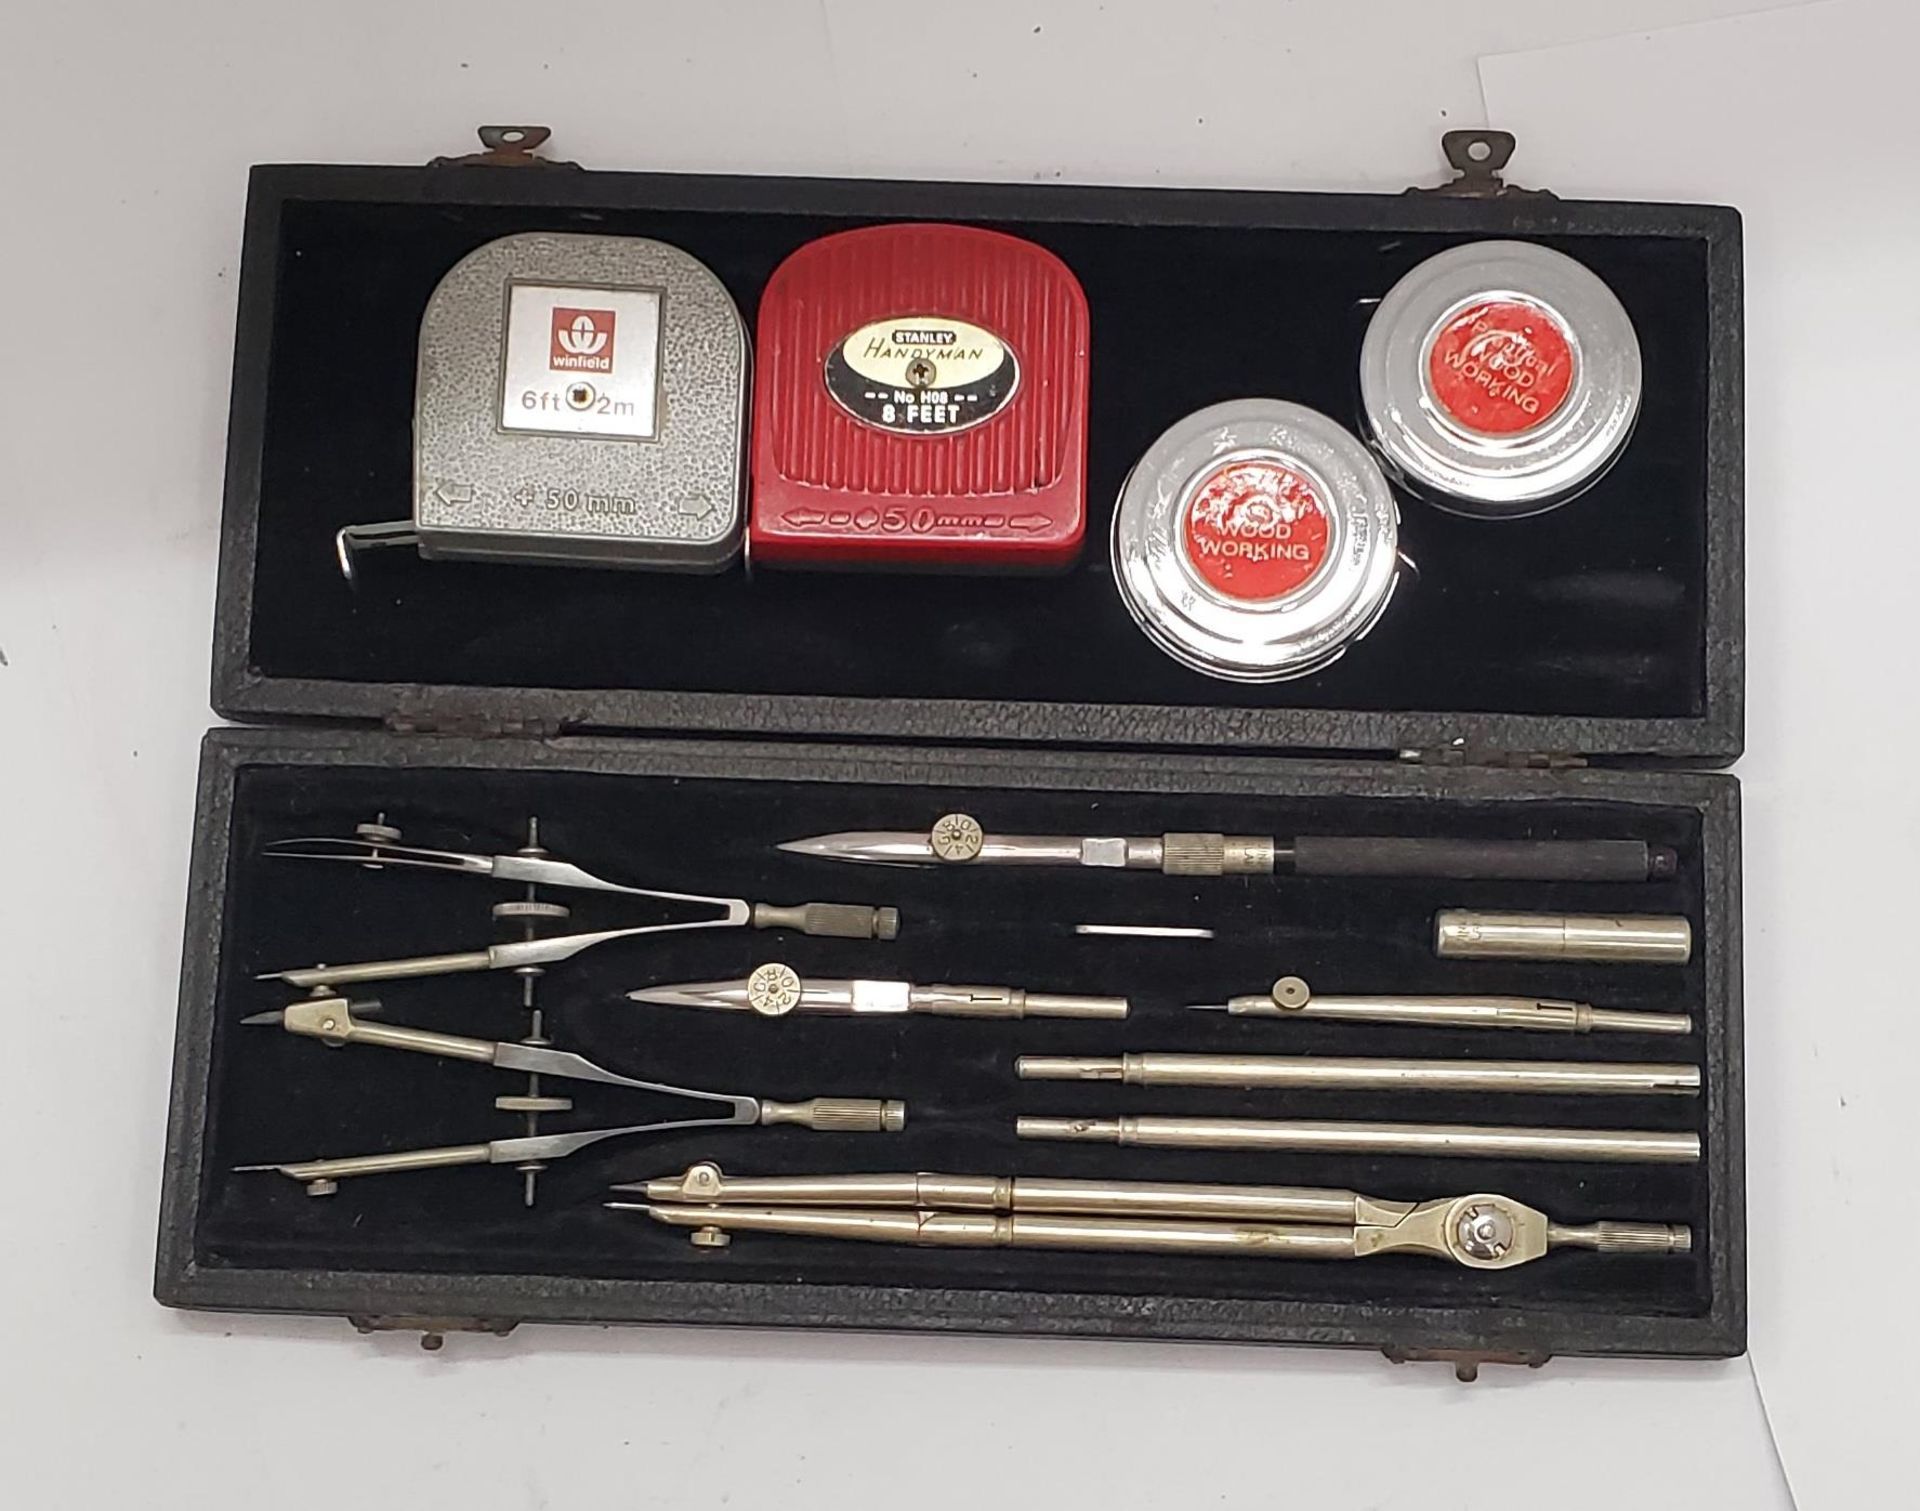 A VINTAGE DRAWING SET, COMPLETE IN CASE, TAPE MEASURES, PLUS A BOX CONTAINING COLLECTABLES - Image 2 of 4